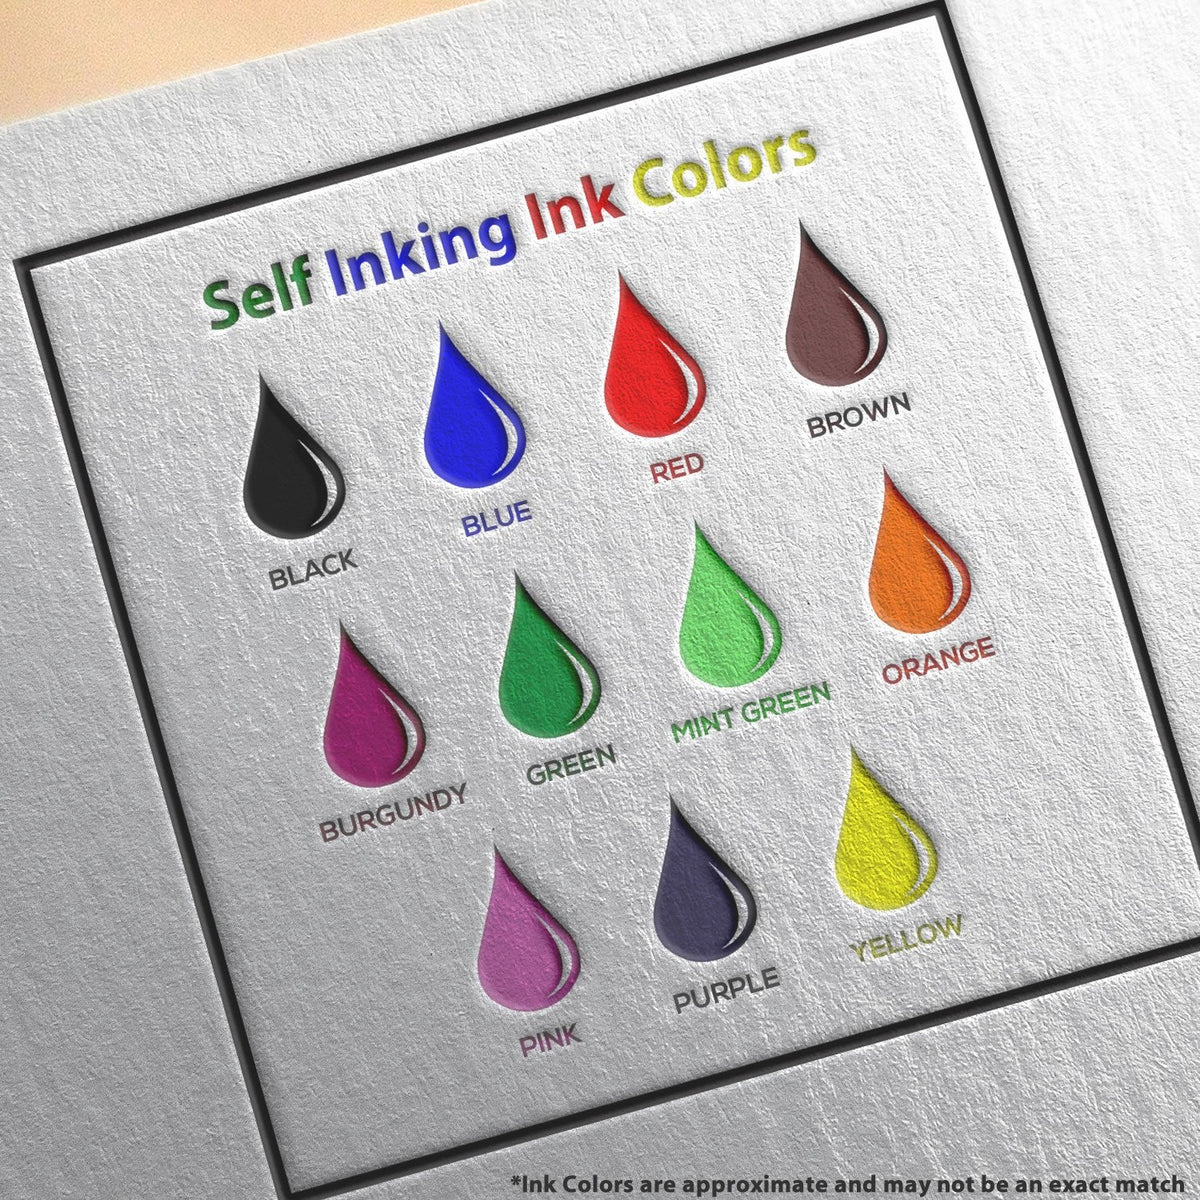 Self-Inking Posted with Thumbtack Stamp Ink Color Options